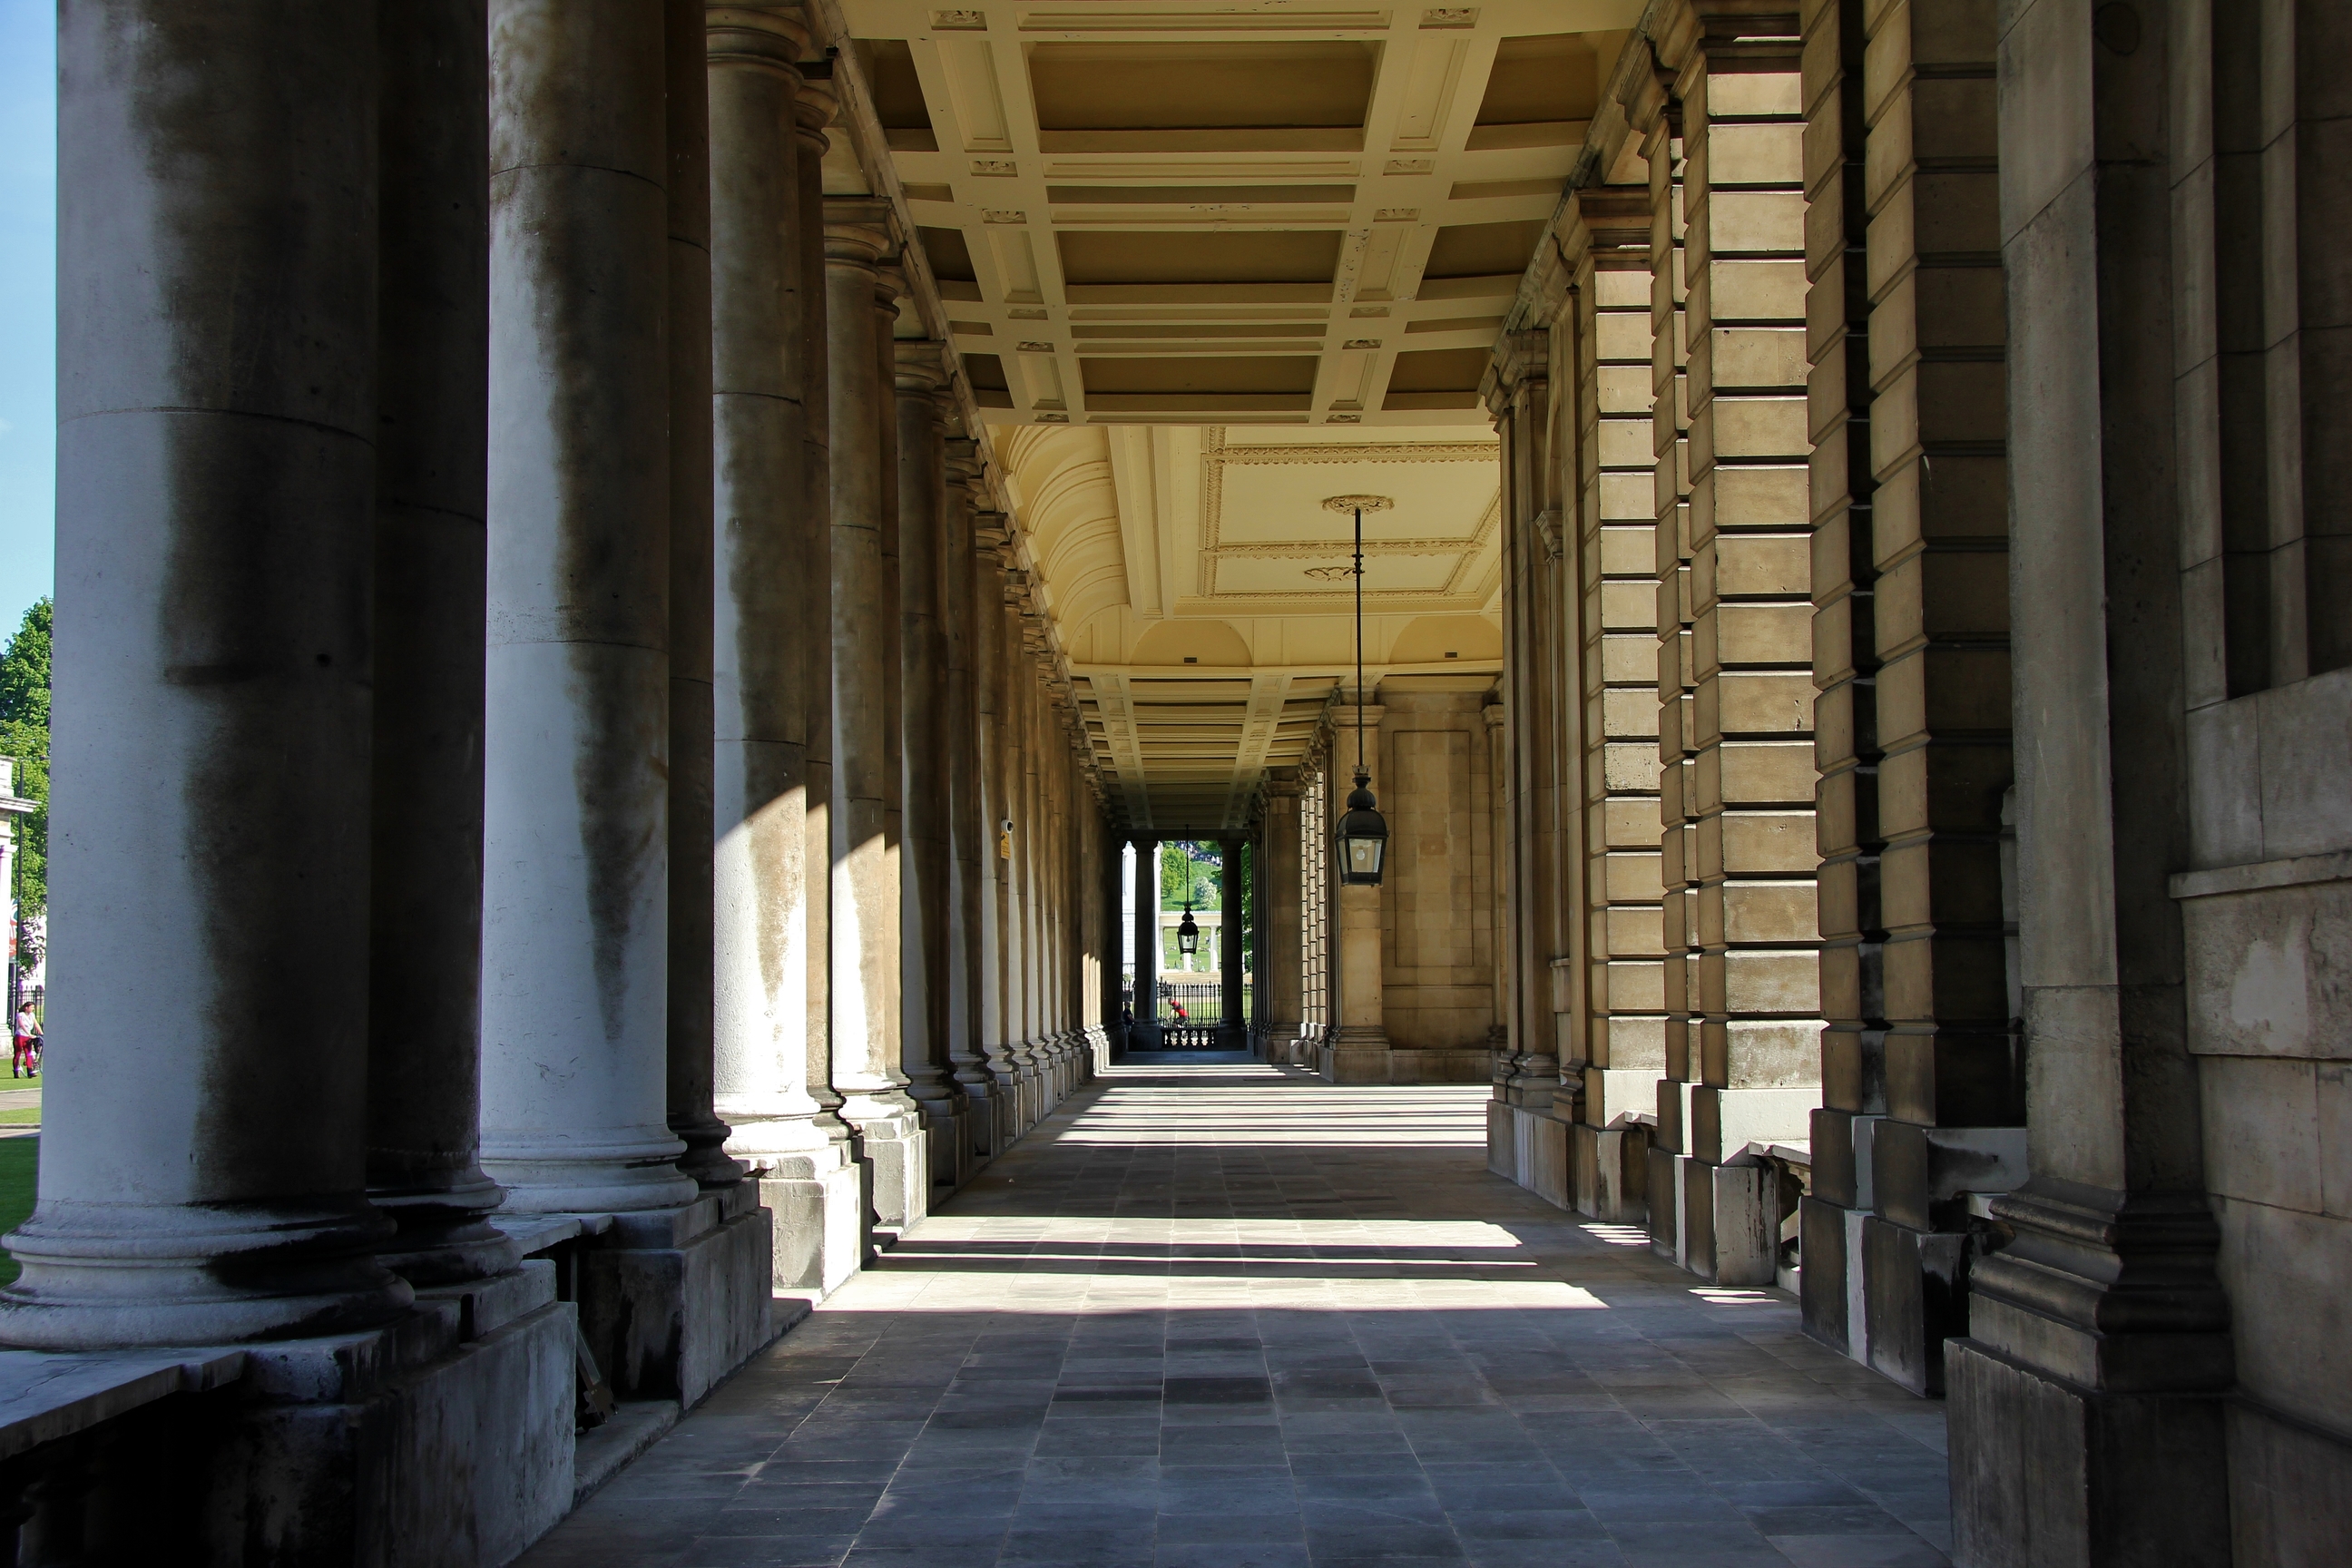 Greenwich Naval College, historical buildings